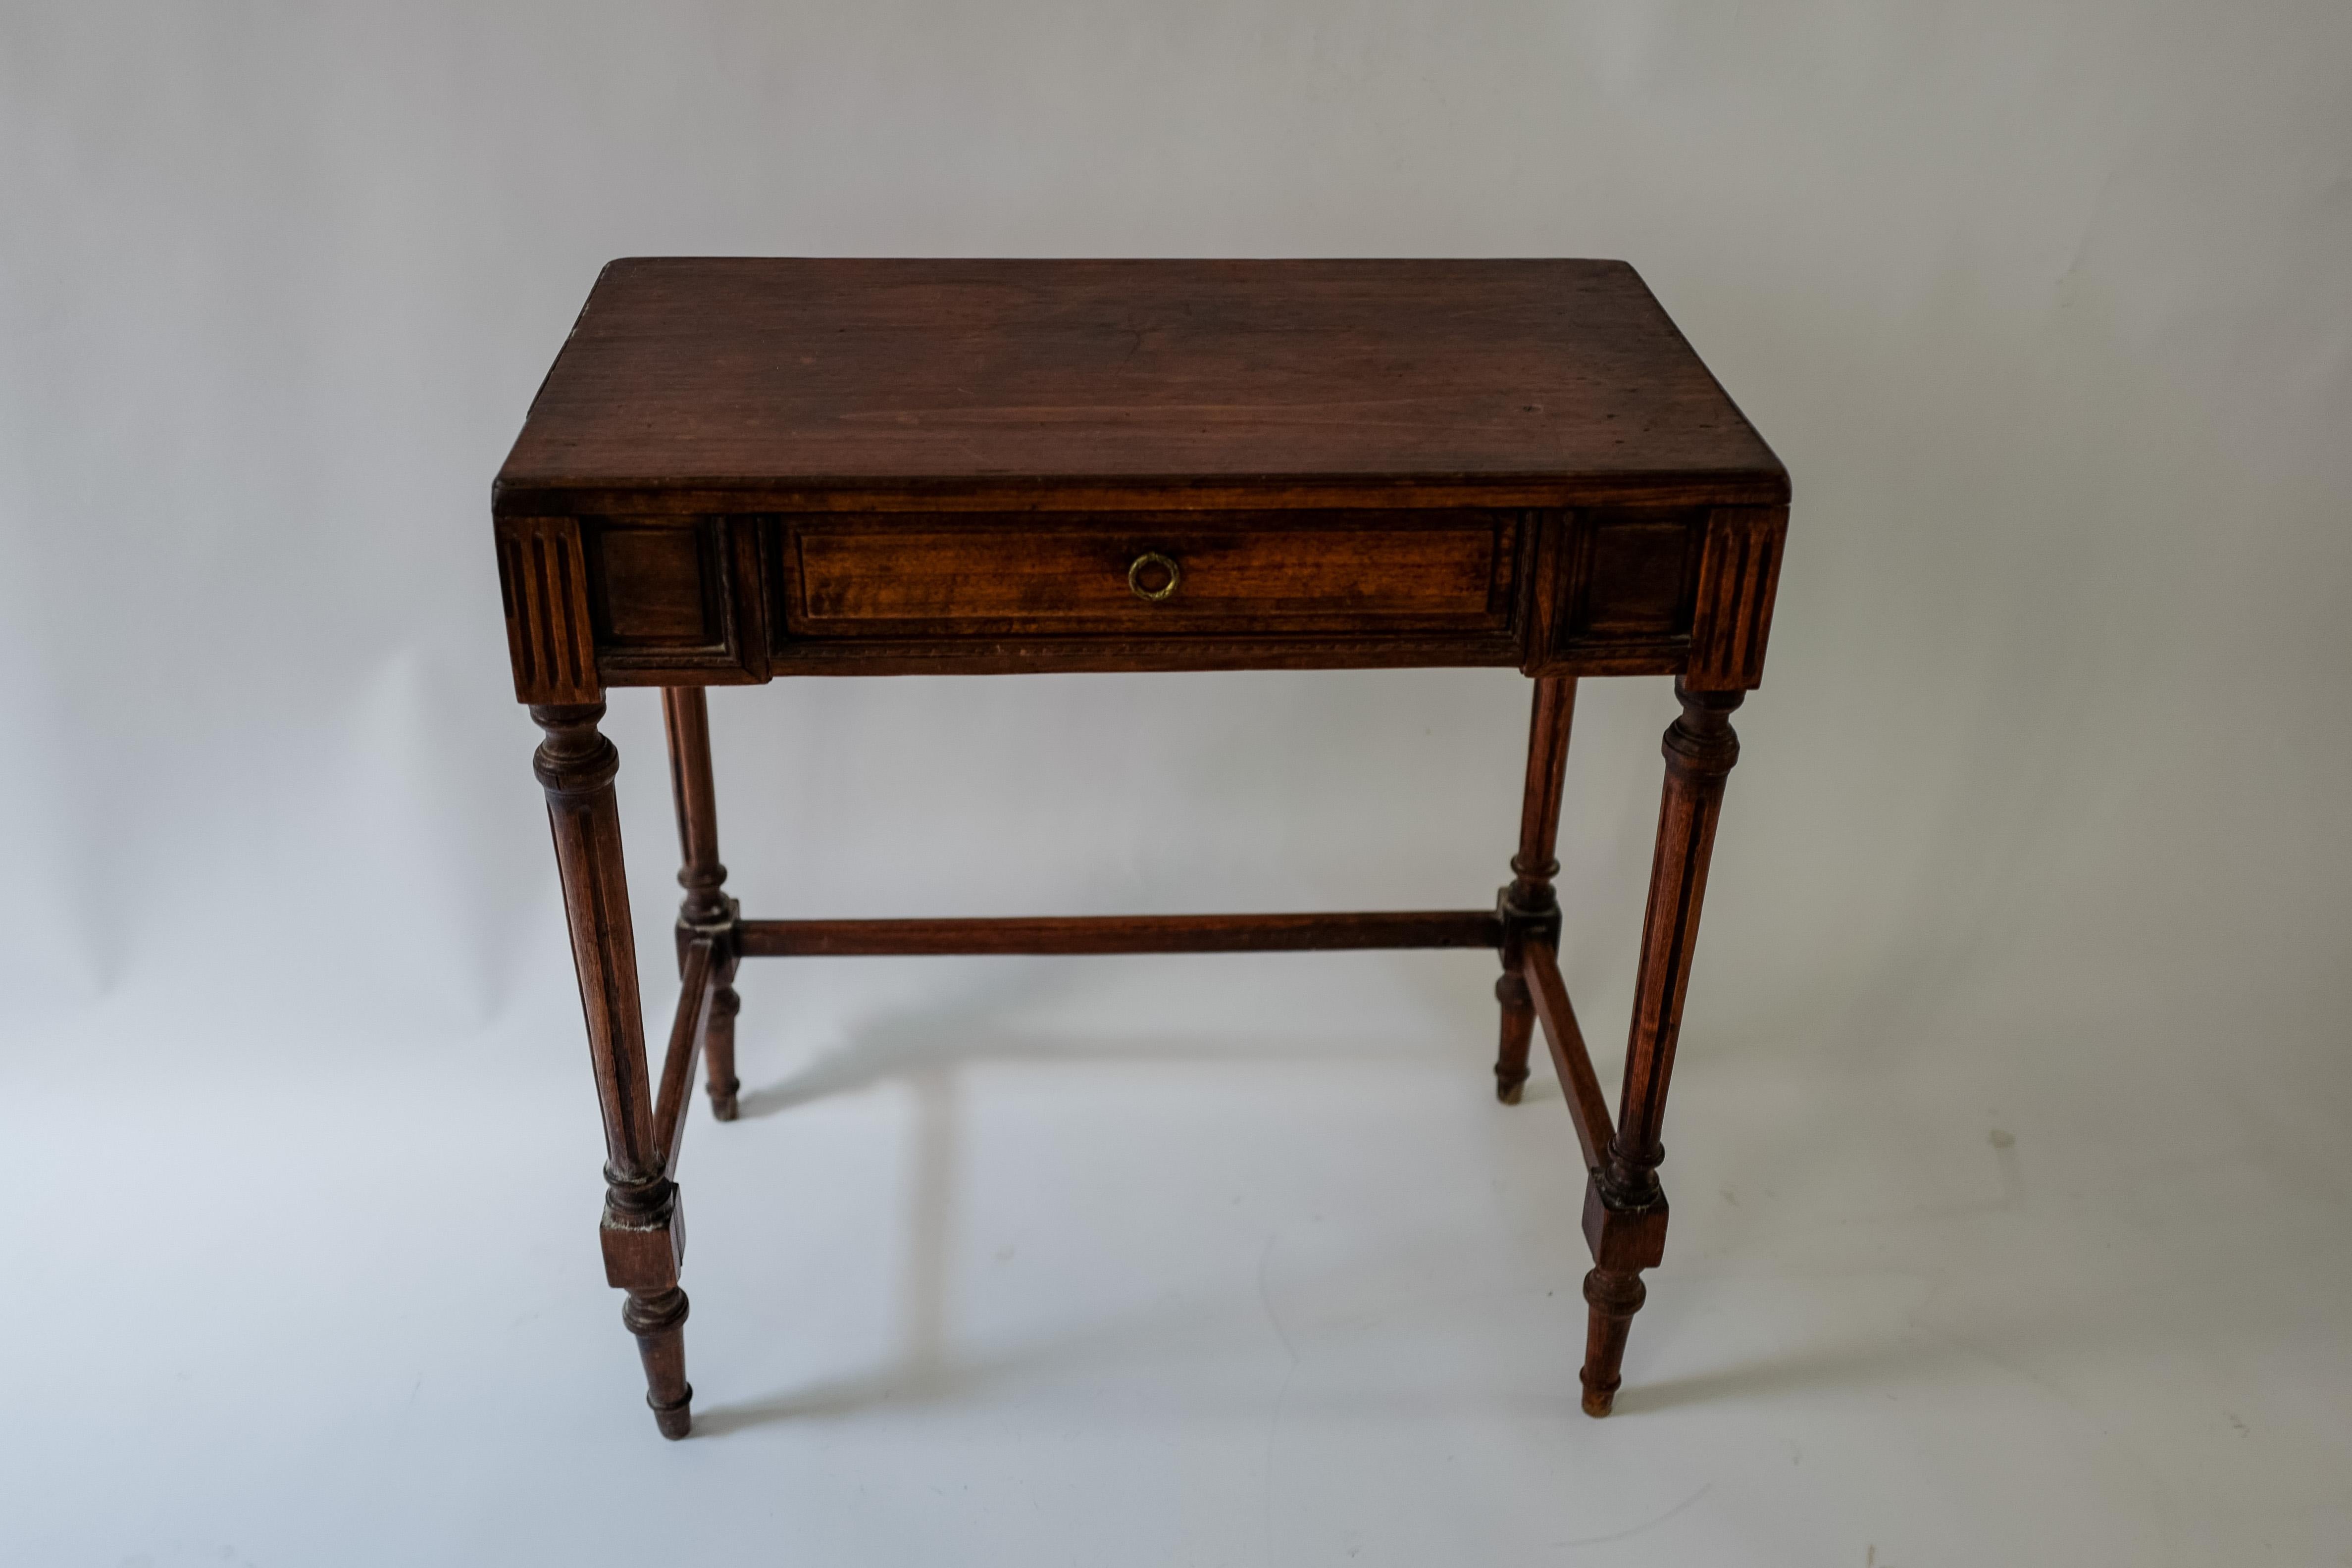 A petit late 19th Century French Louis console made of stained oak. Beautifully hand carved details and a single drawer with pull. Lightweight. 